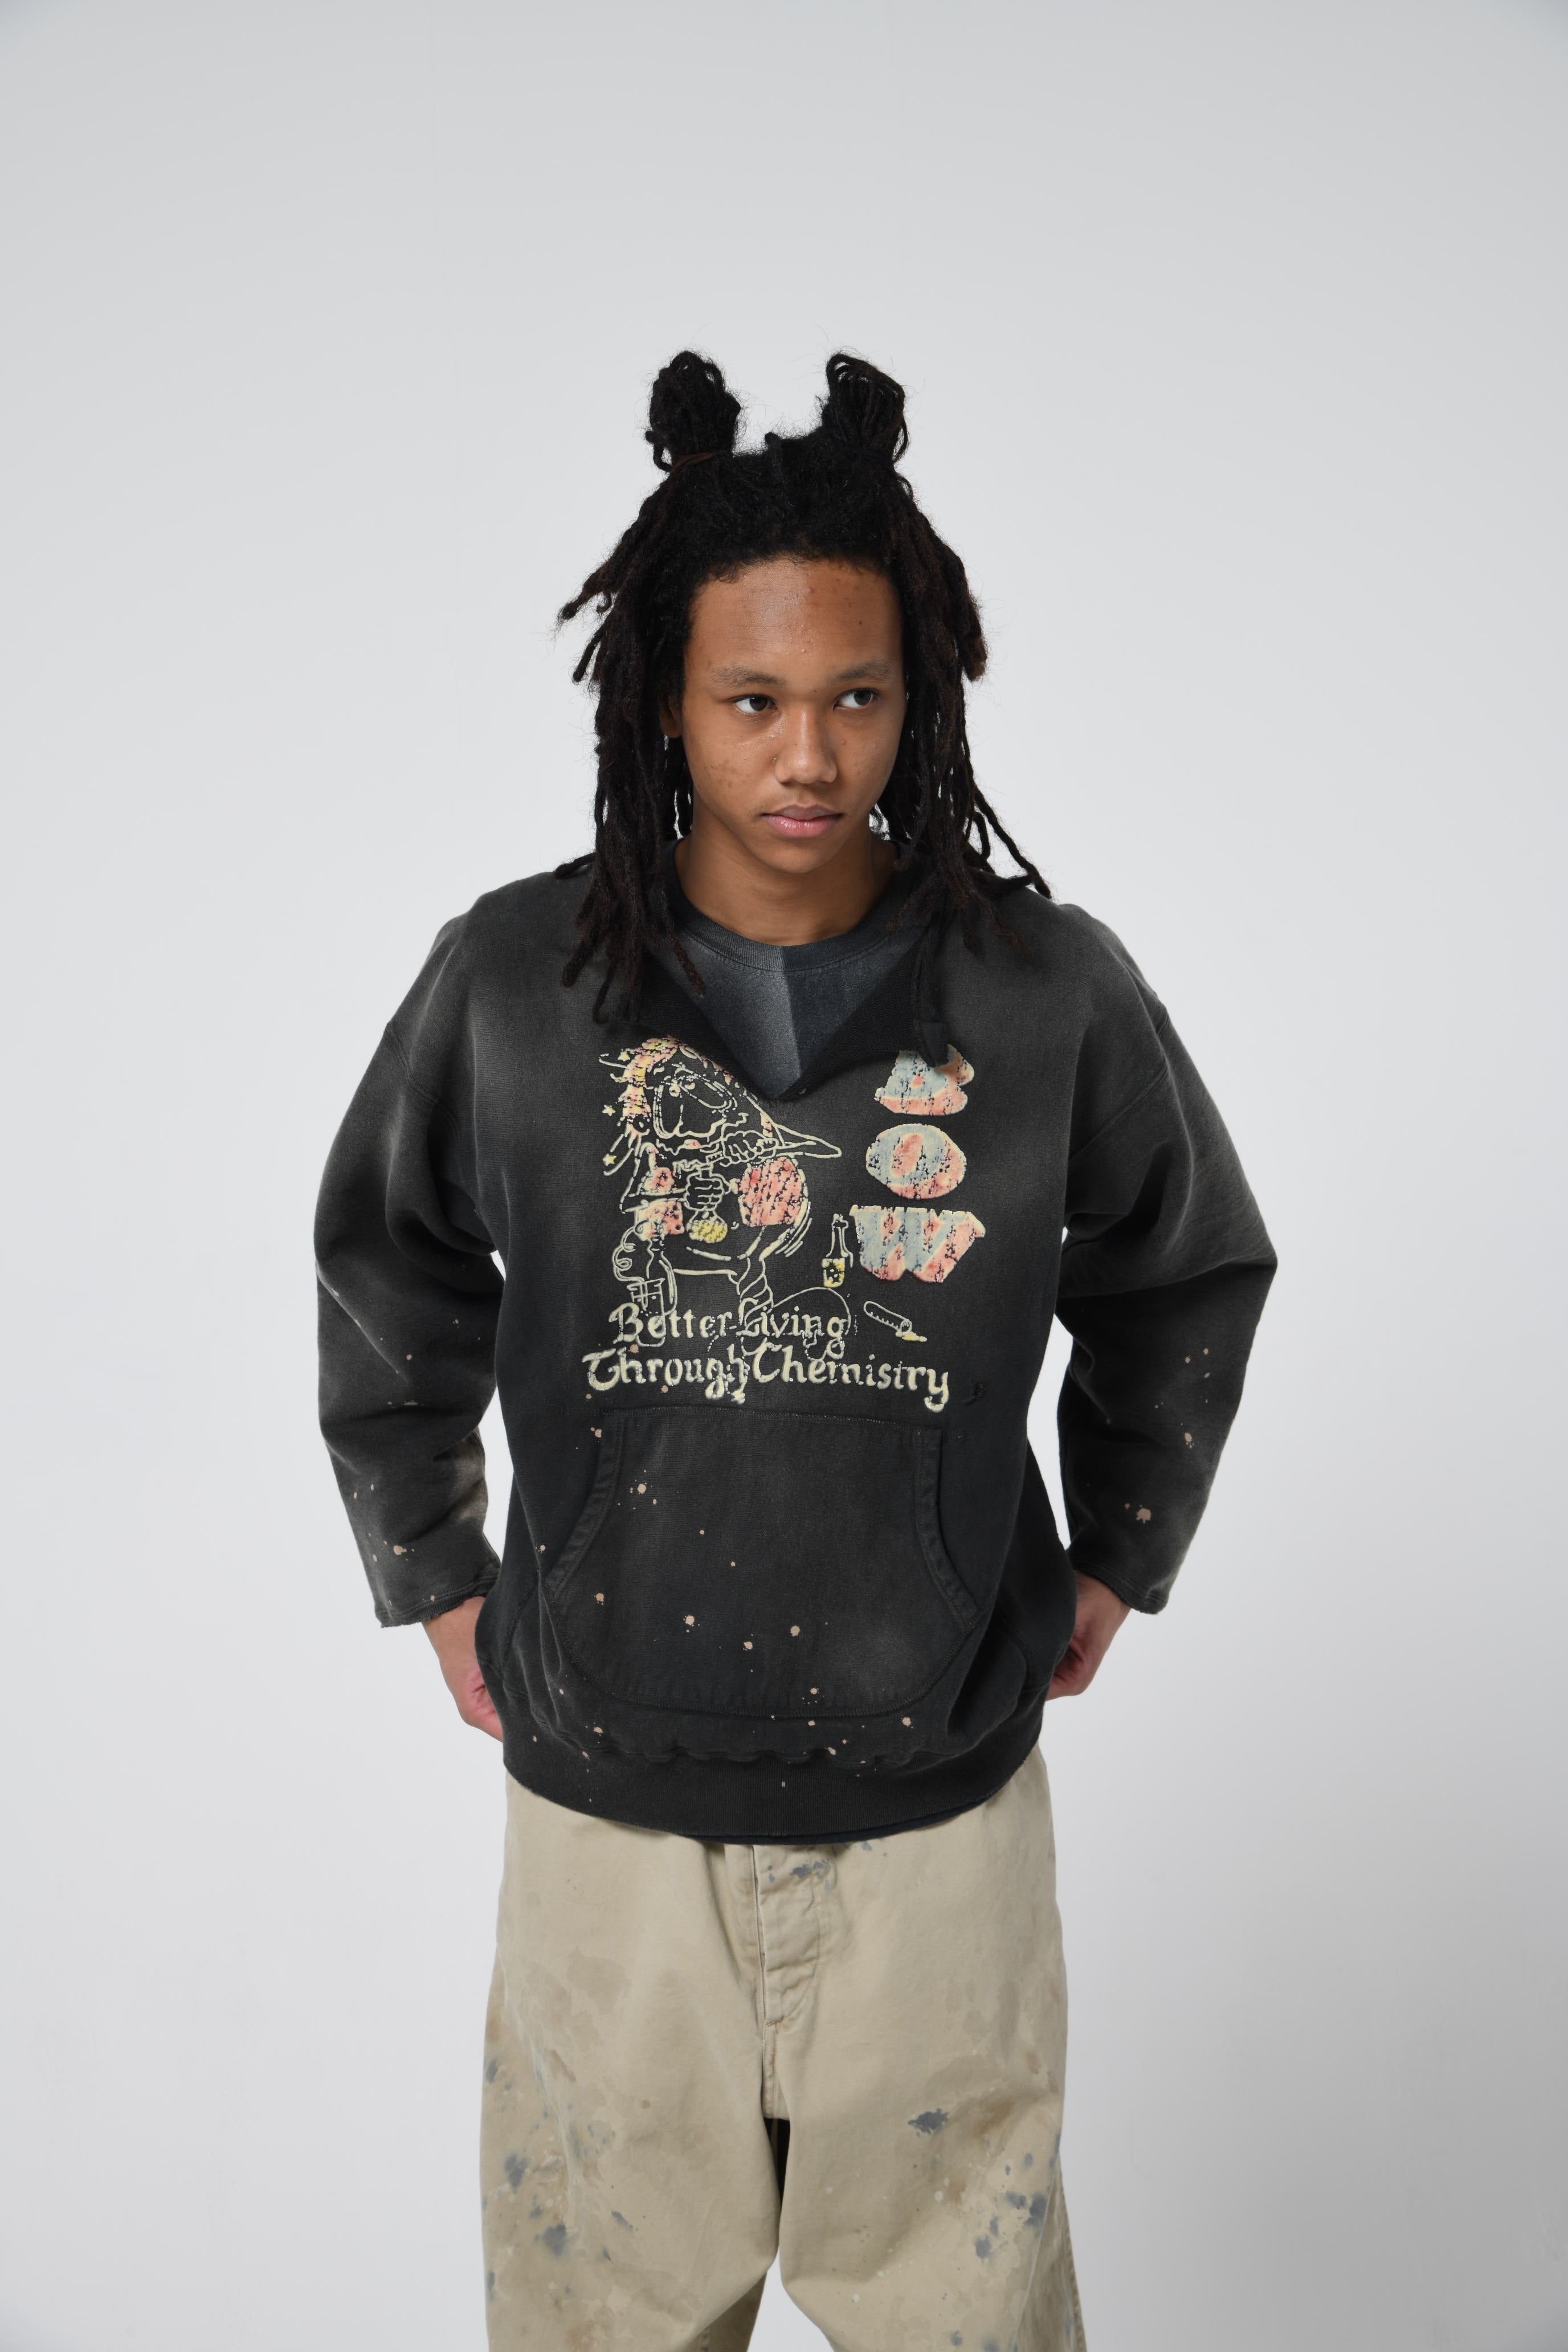 CHEMISTRY CUT OFF SWEAT SHIRTS – C30 - BOW WOW, RECOGNIZE FLAGSHIP